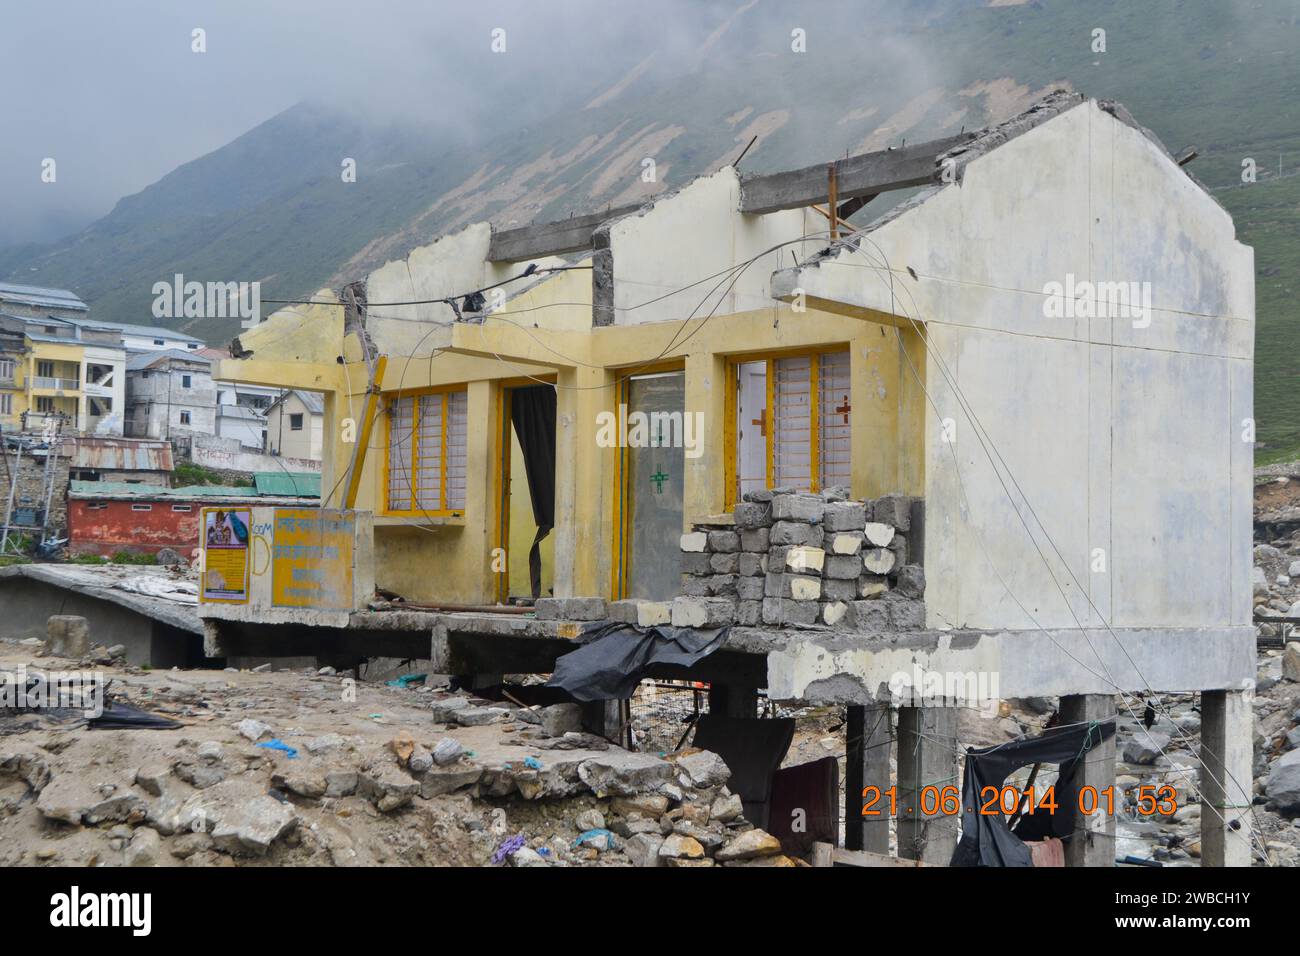 Damaged buildings in Kedarnath disaster June 2013. In June 2013, a multi-day cloudburst centered on the North Indian state of Uttarakhand caused devas Stock Photo